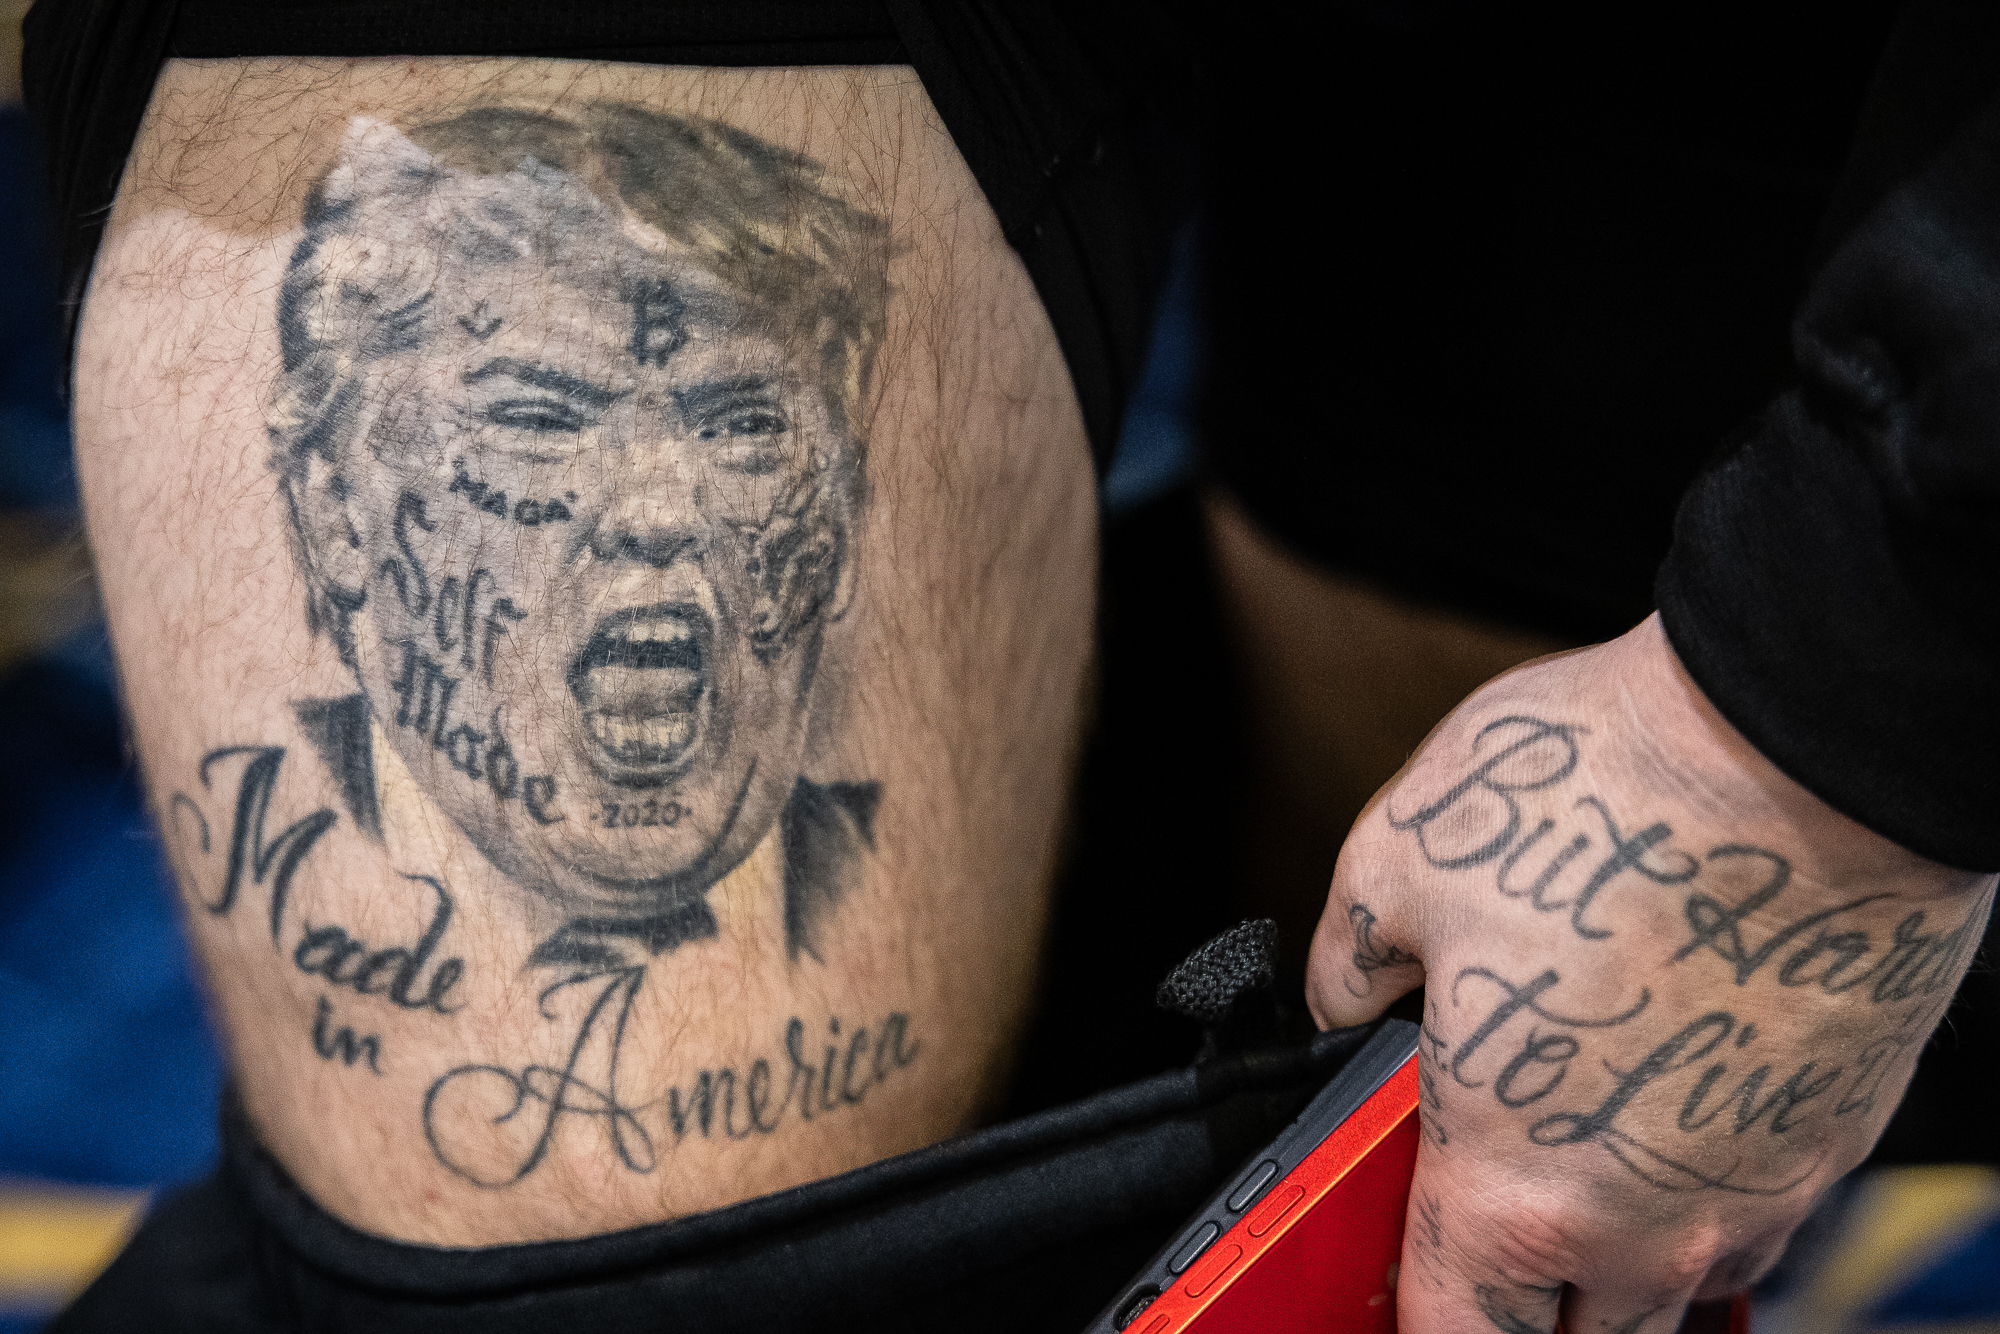 Rapper Forgiato Blow, a true Trump fanatic, revealed a tattoo of of the former president's face on his leg.